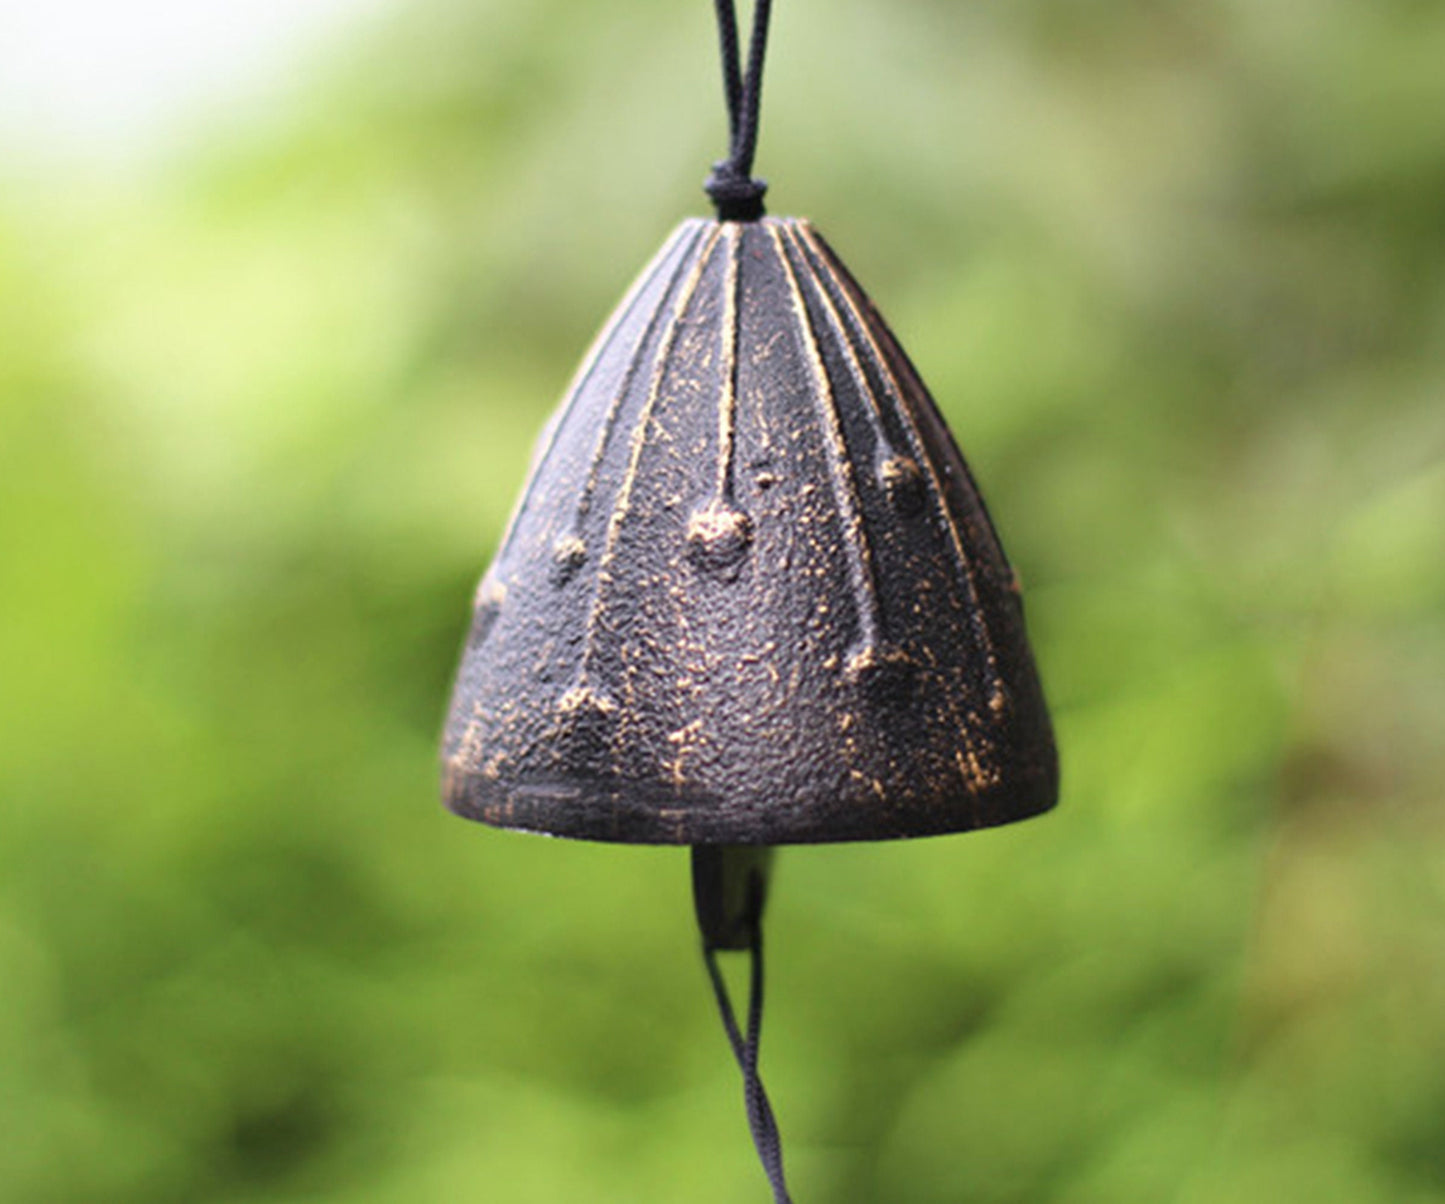 Cute Metal Flower Wind Chime, Japanese Style Iron Bell Ring Windchime